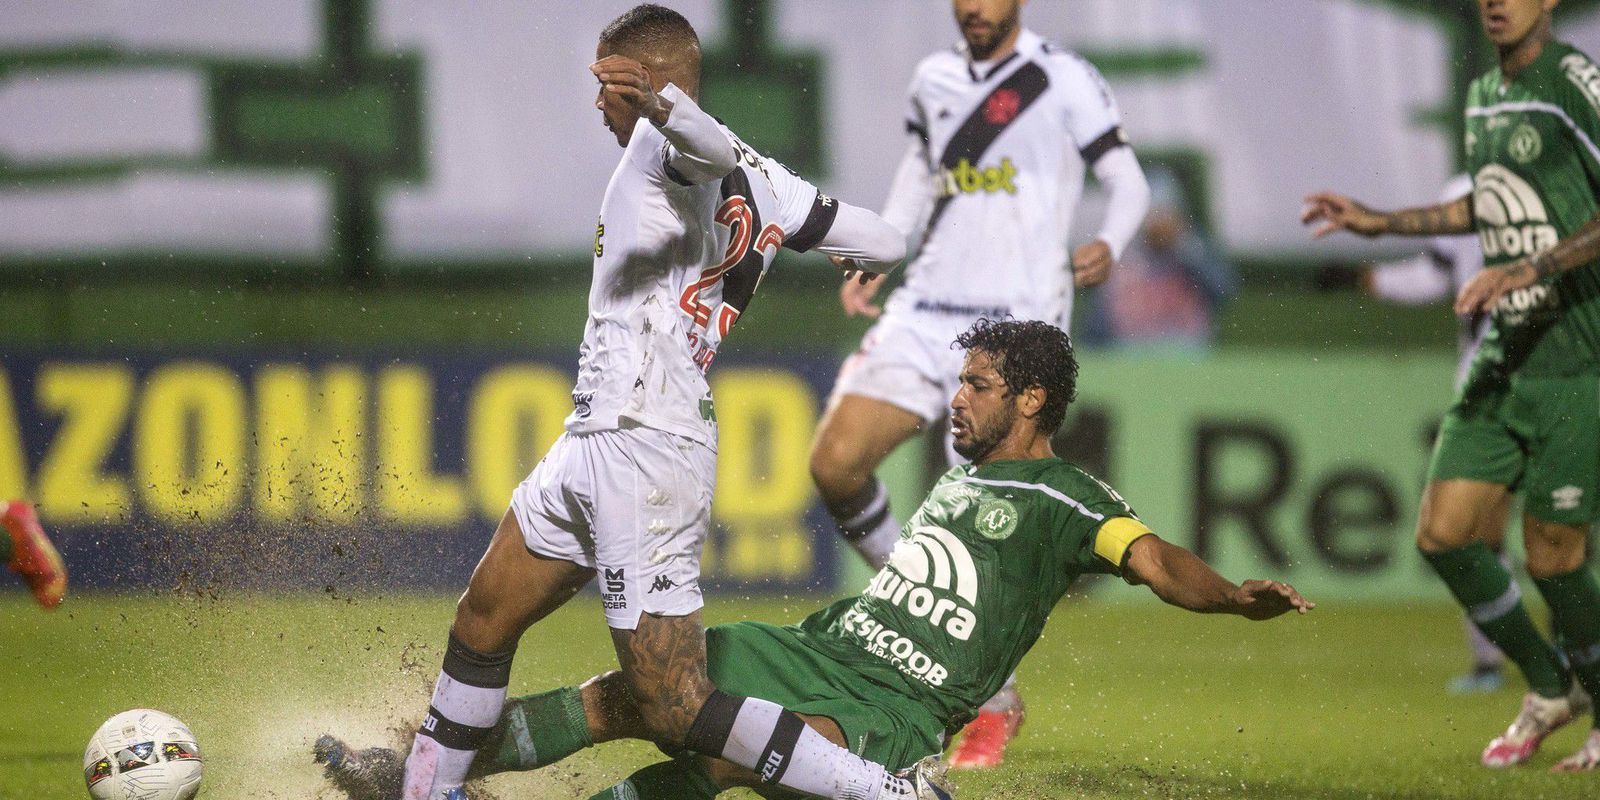 Playing at Arena Condá, Vasco draws with Chapecoense